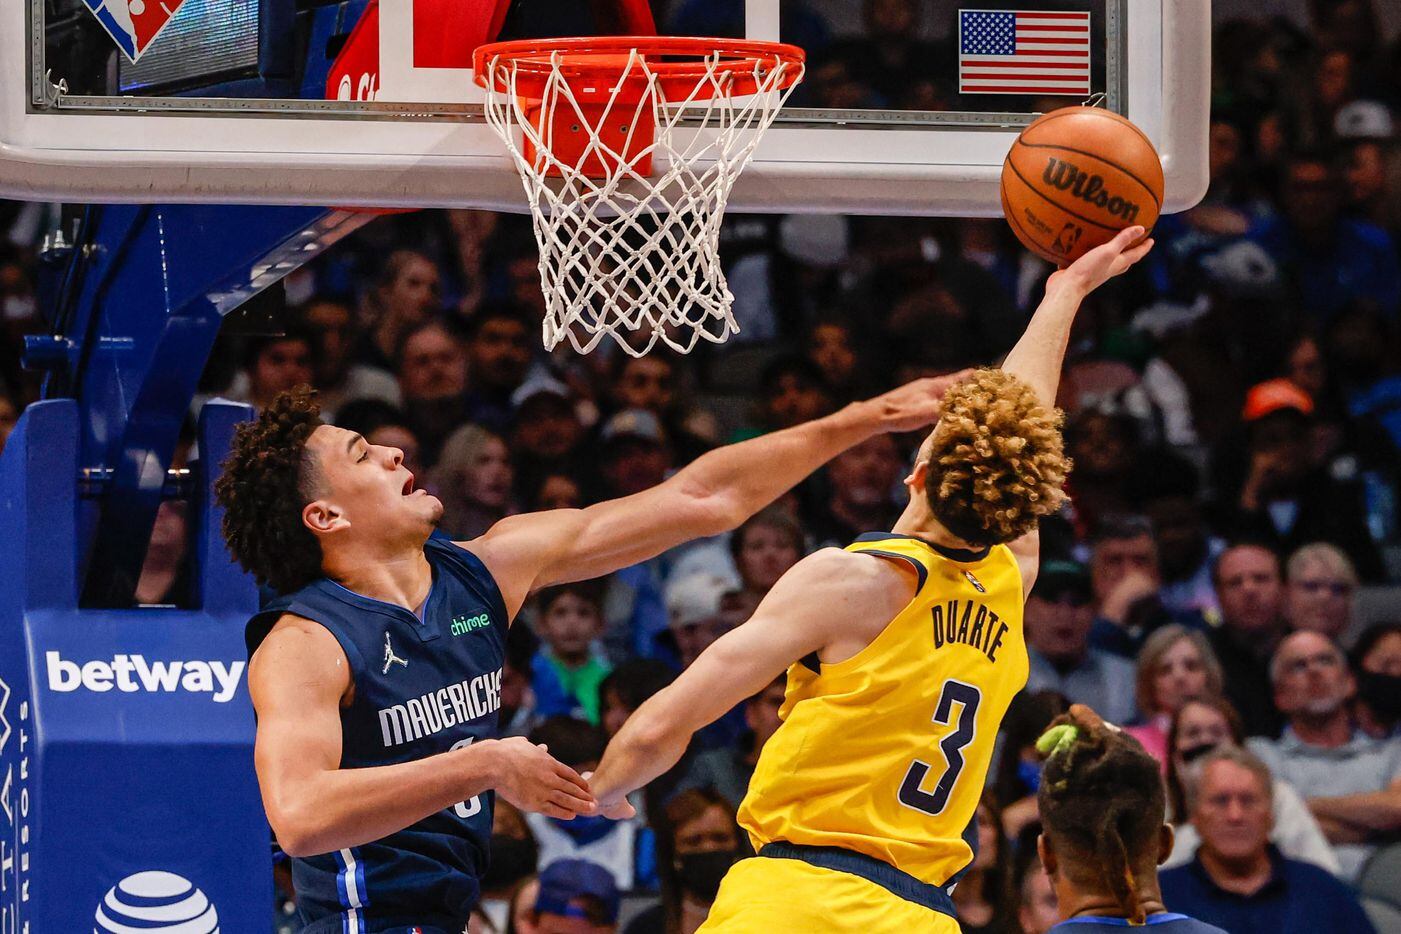 Indiana Pacers guard Chris Duarte (3) goes for a shot as Dallas Mavericks forward George King (8) tries to block him during the second half at the American Airlines Center in Dallas on Saturday, January 29, 2022.